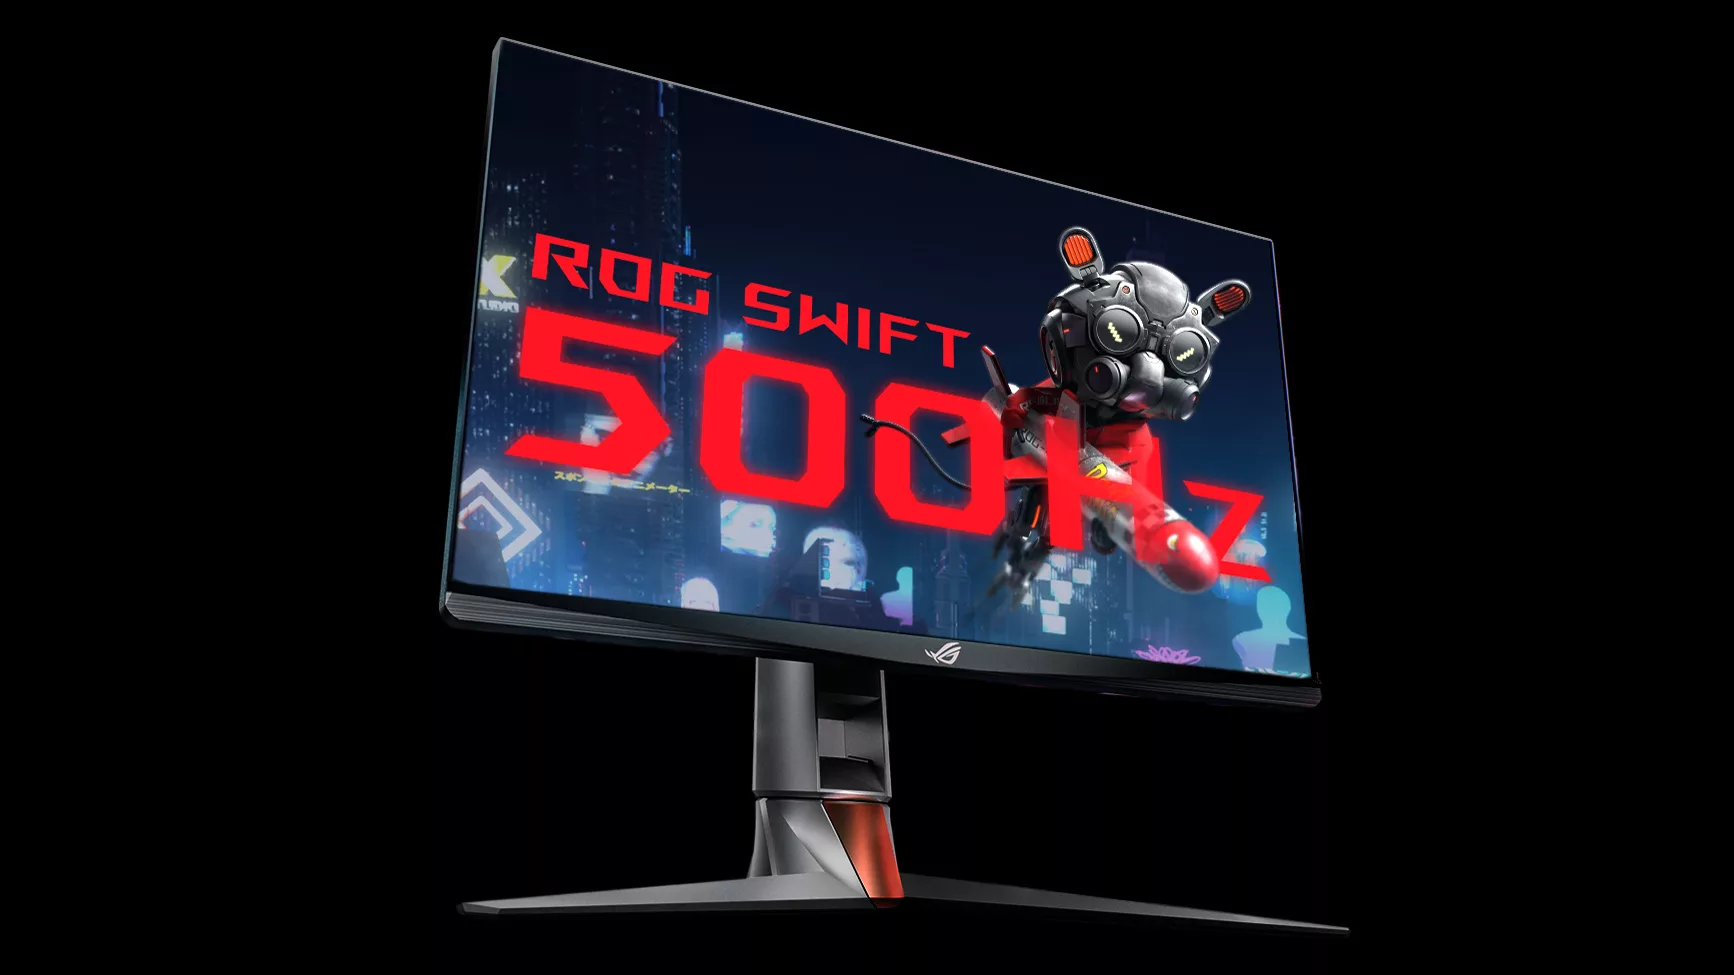 An image of the ROG Swift 500Hz monitor, with a picture of Omni the robot jumping out of the screen.